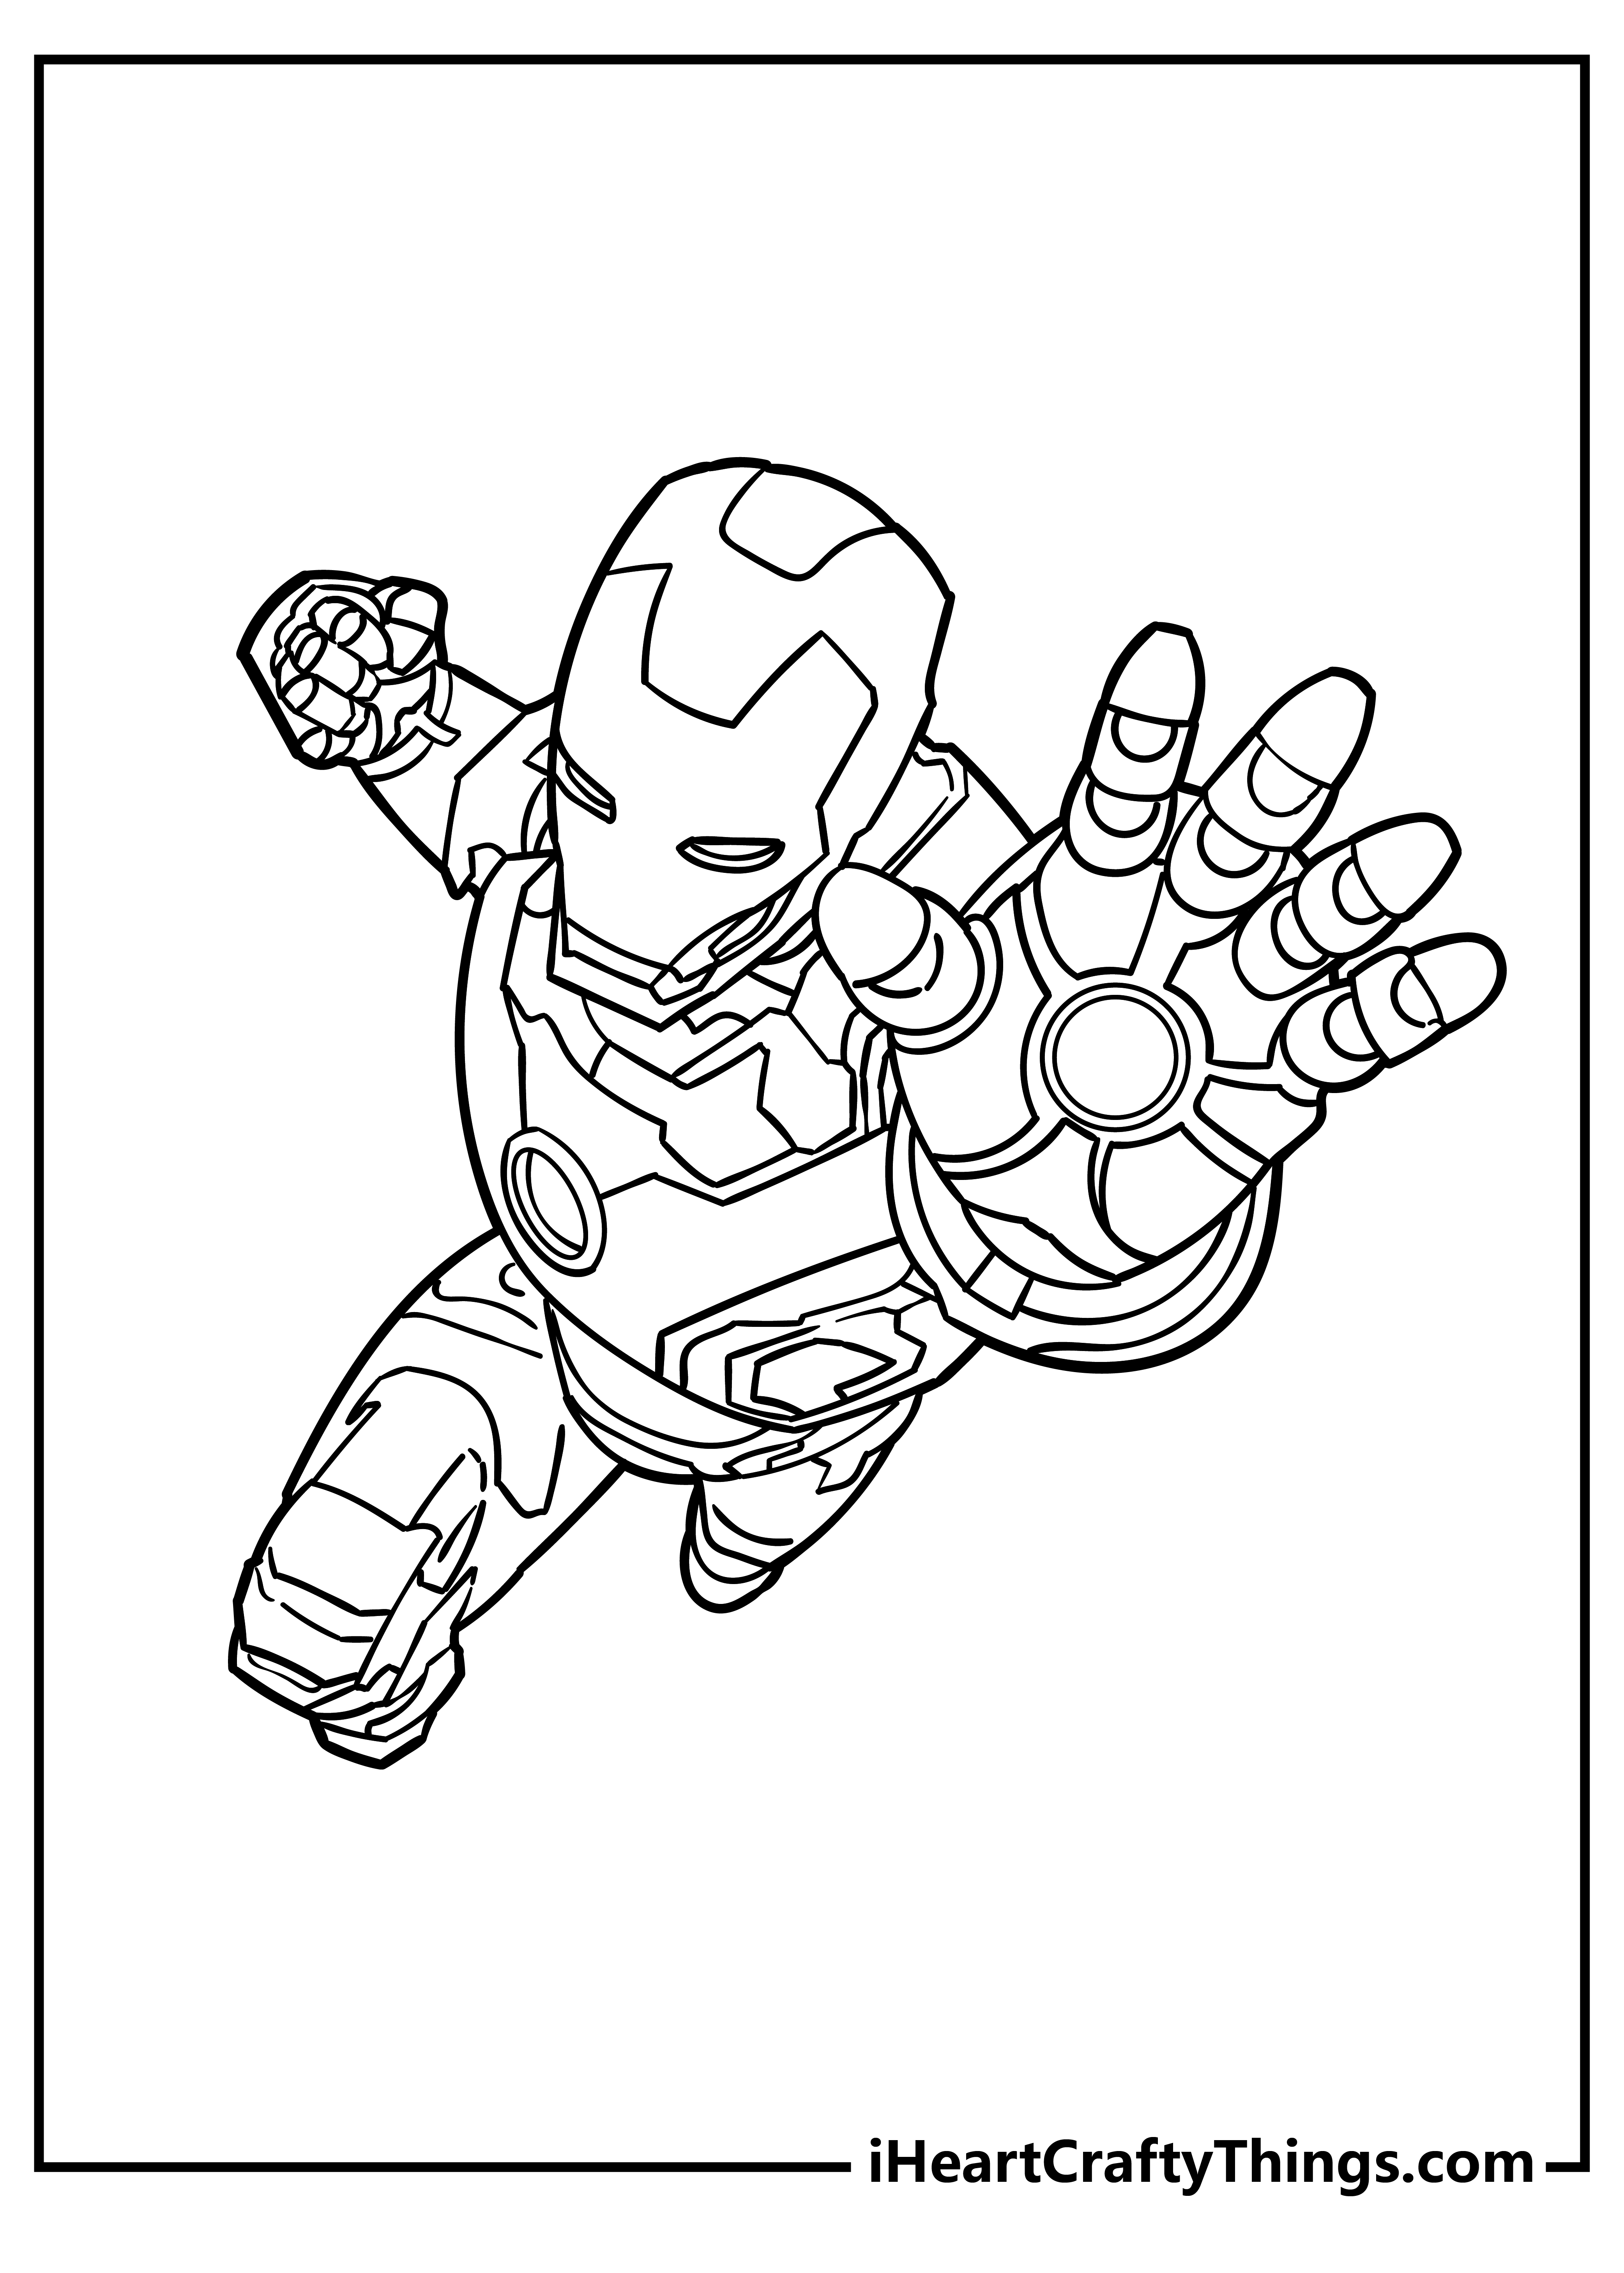 How to draw The Avengers (new) - Sketchok easy drawing guides-saigonsouth.com.vn